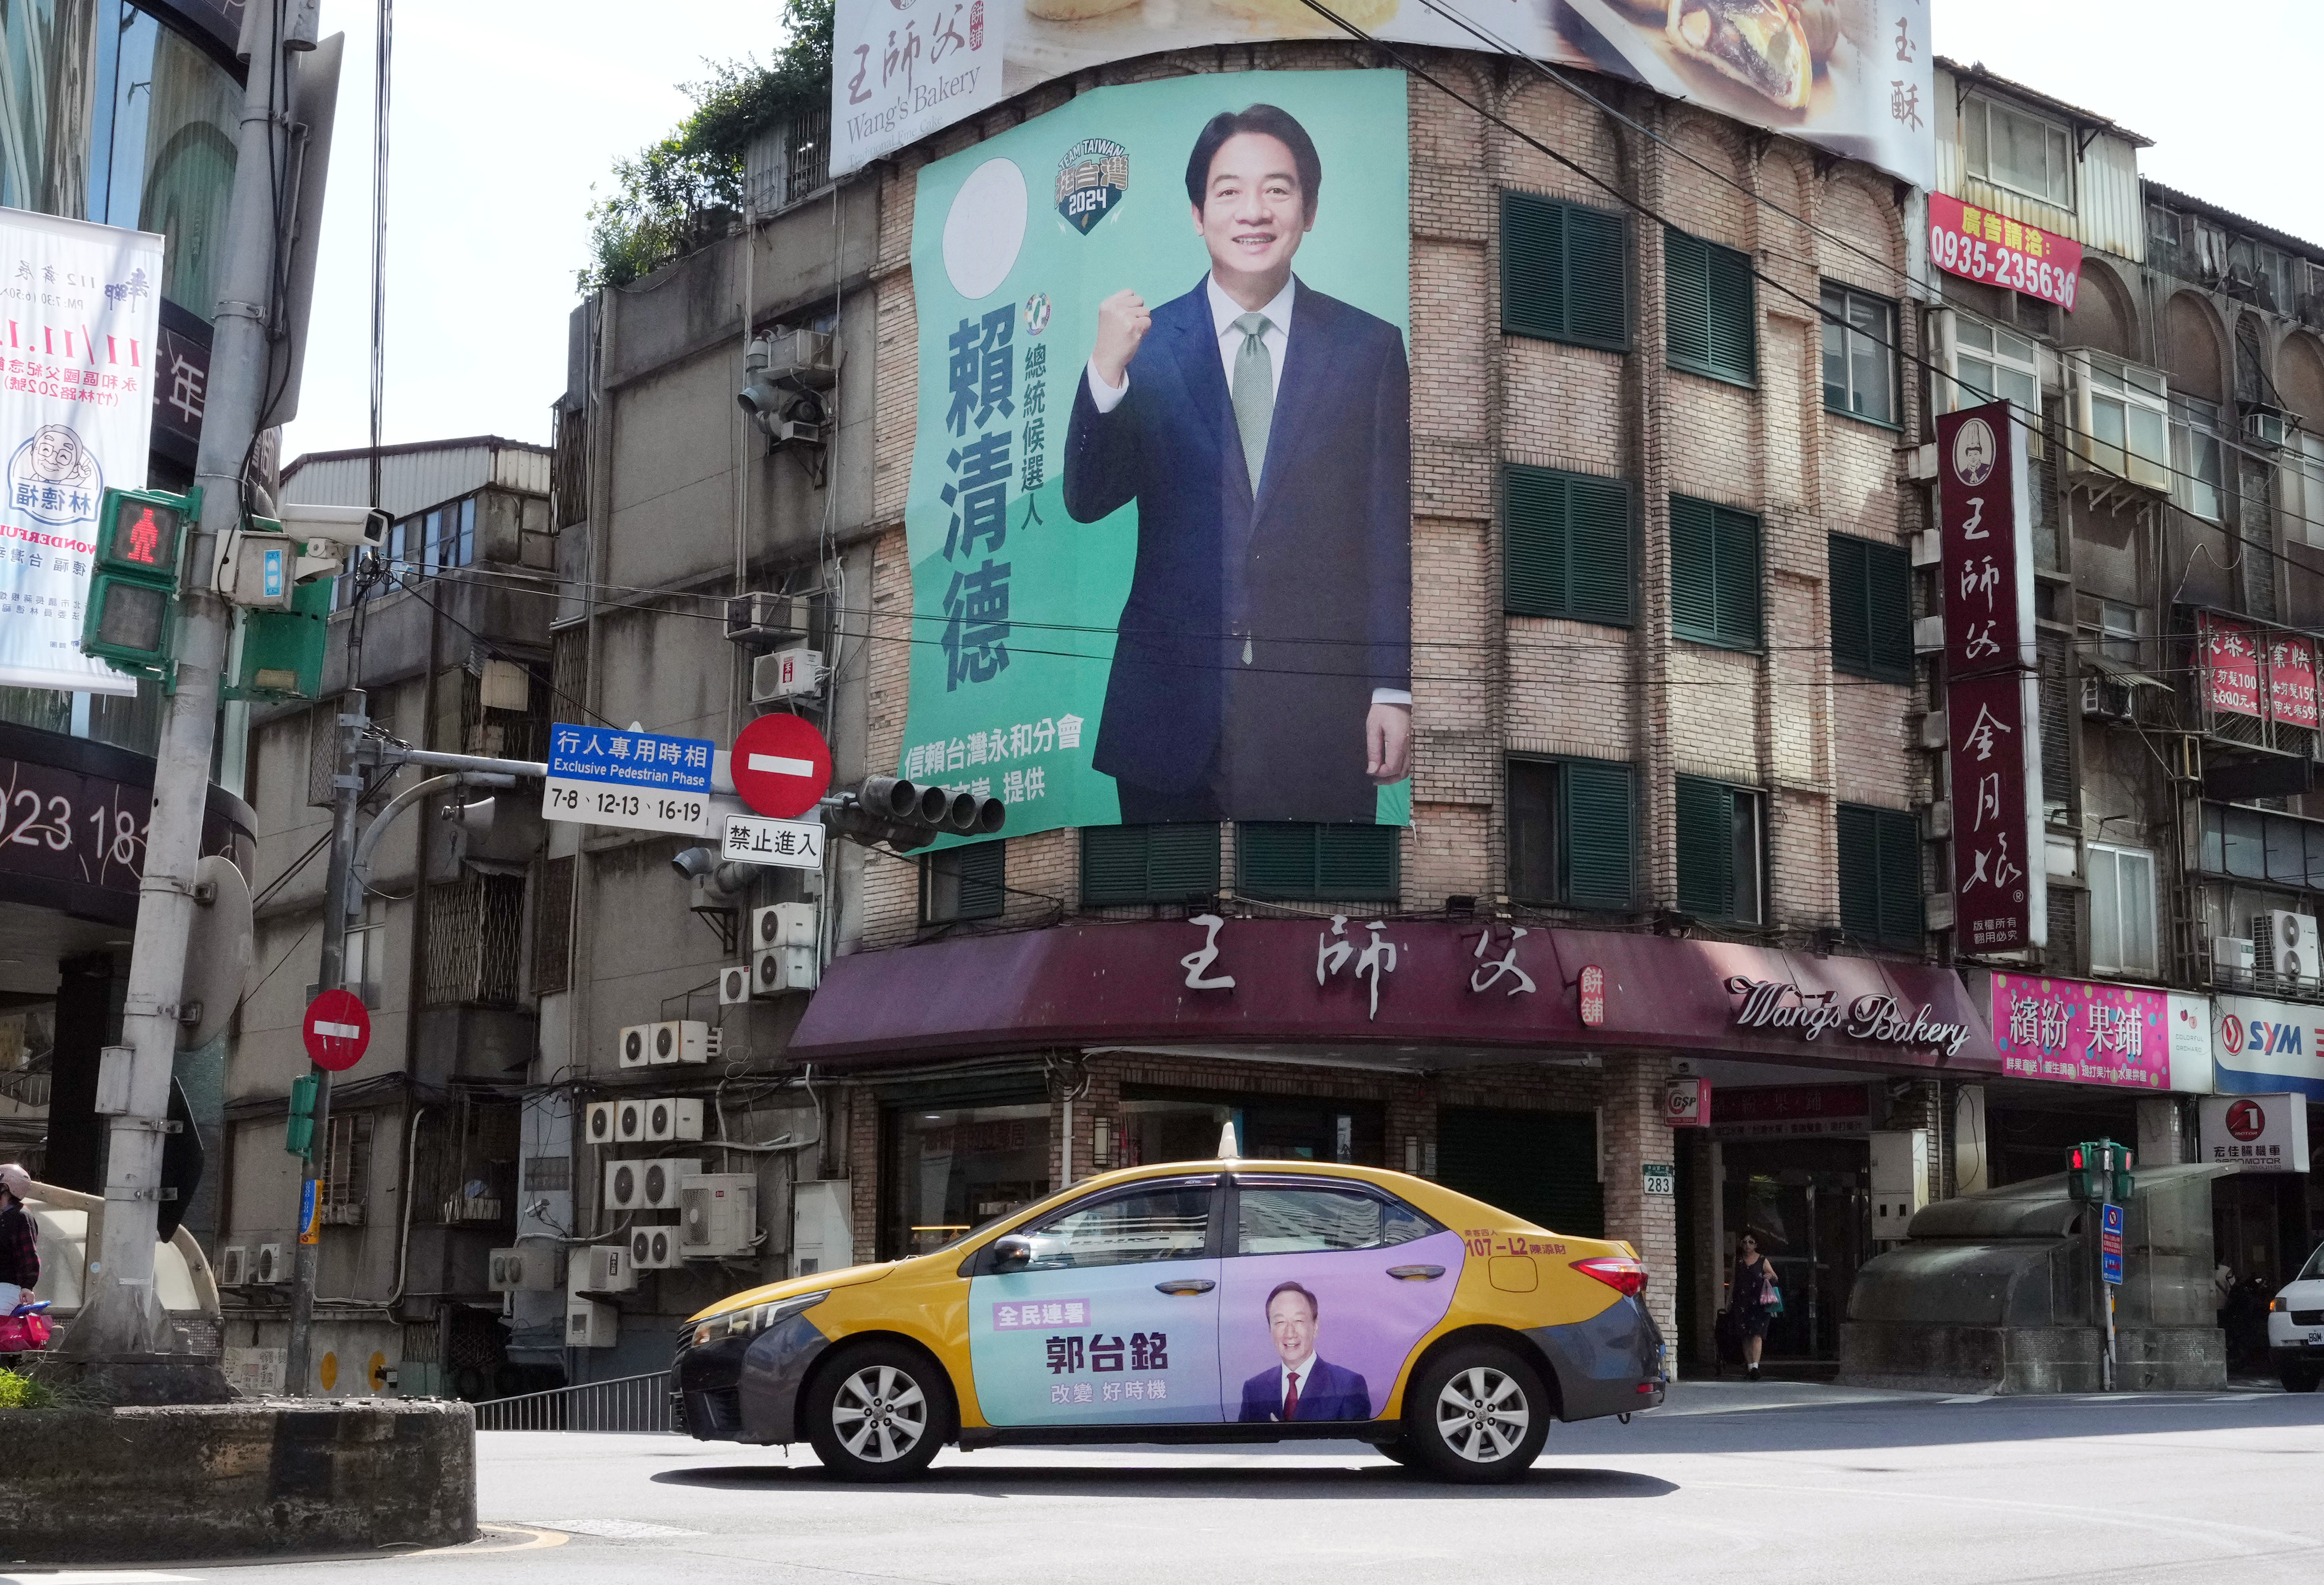 Some advertisements of candidates are seen on a building wall and a taxi prior to Taiwan's presidential election in New Taipei City, Taiwan on 8 November 2023. The Yomiuri Shimbun via Reuters